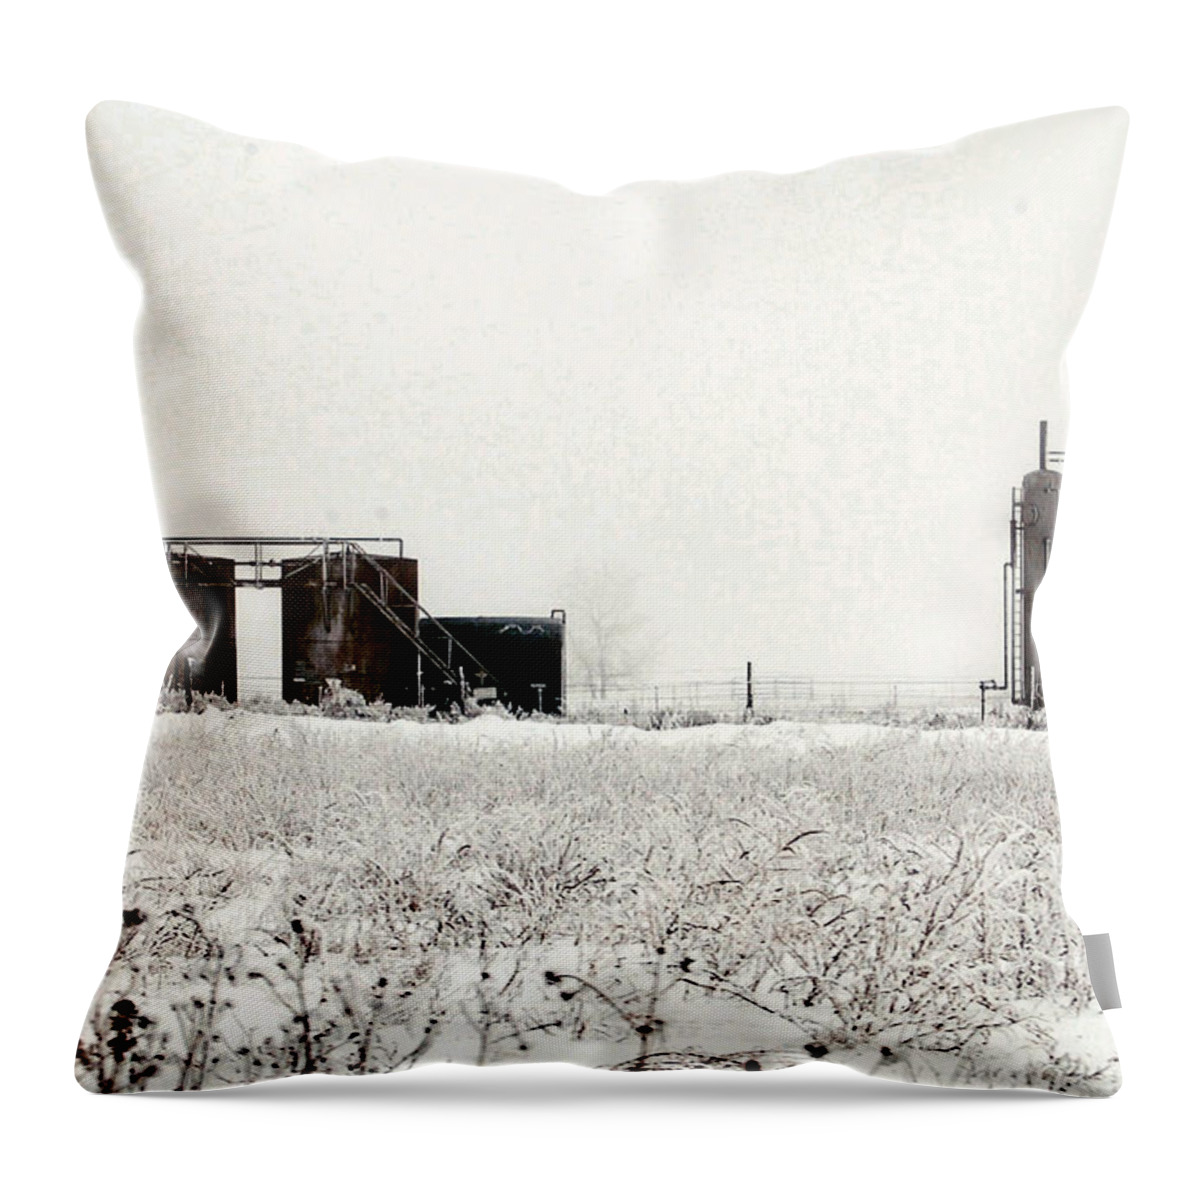 Landscape Throw Pillow featuring the photograph Oklahoma Wellsite by Anjanette Douglas